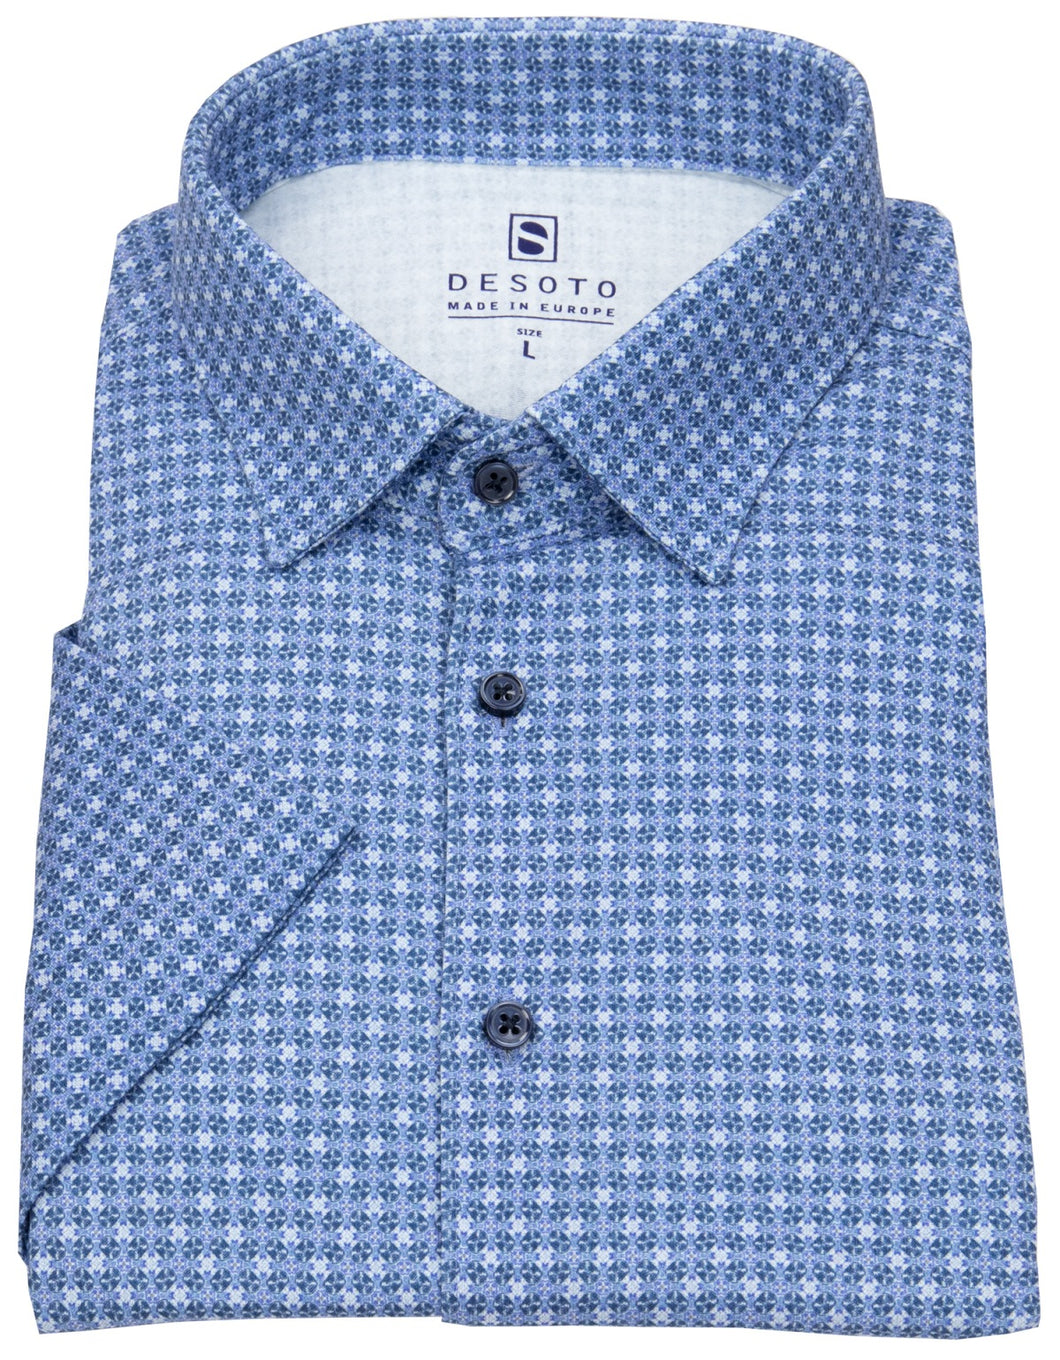 Desoto S/S Jersey Shirt in Blue Print